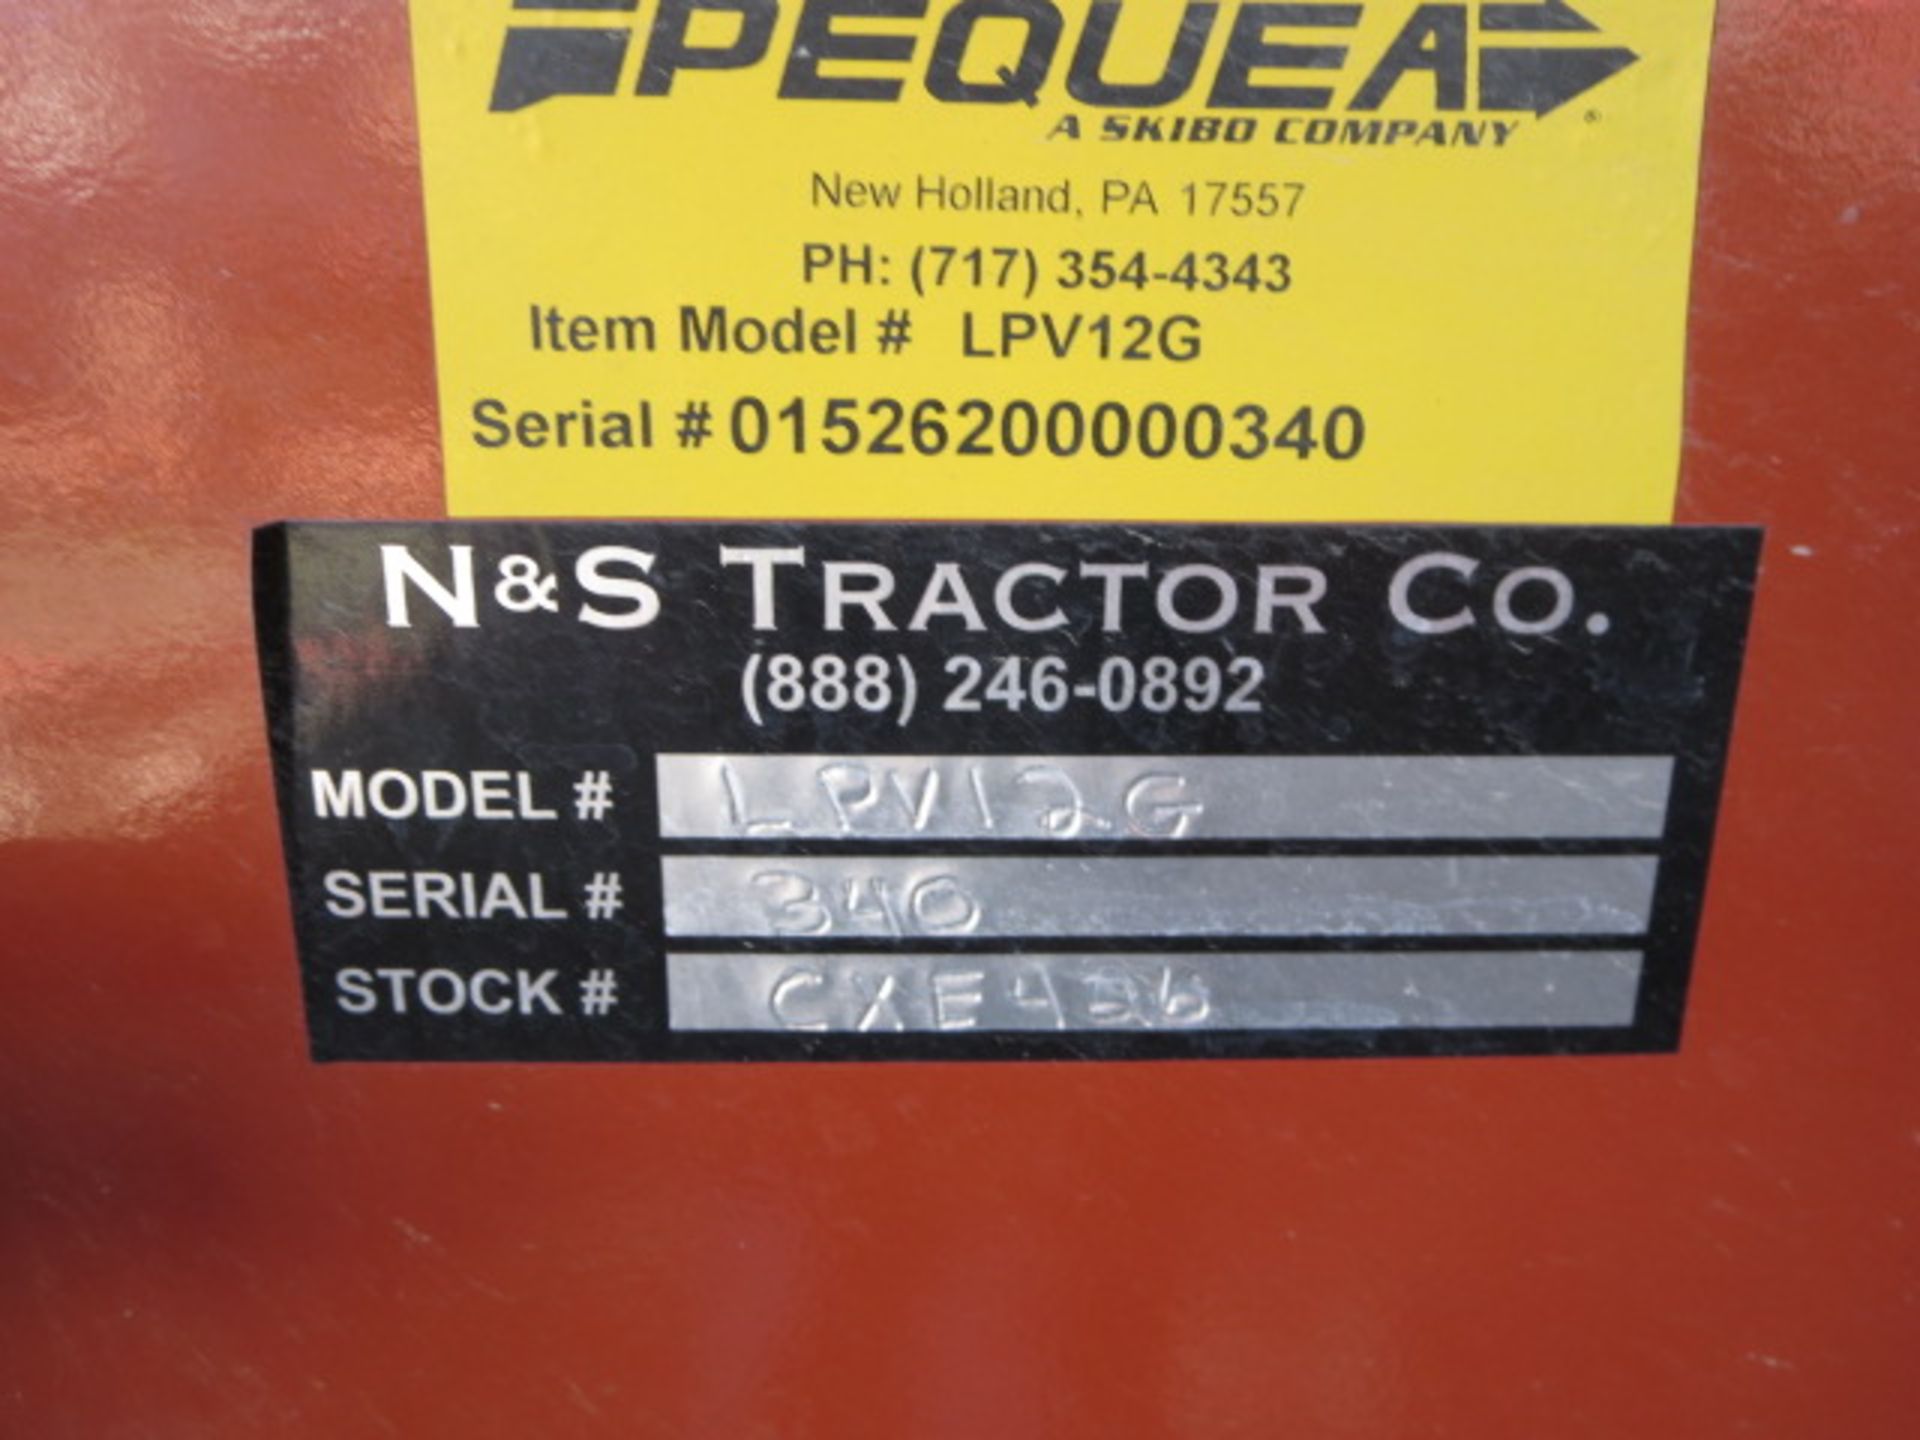 2016 Pequea Orchard Spreader Model LPV12G S/N 240; sale is subject to confirmation - Image 15 of 15